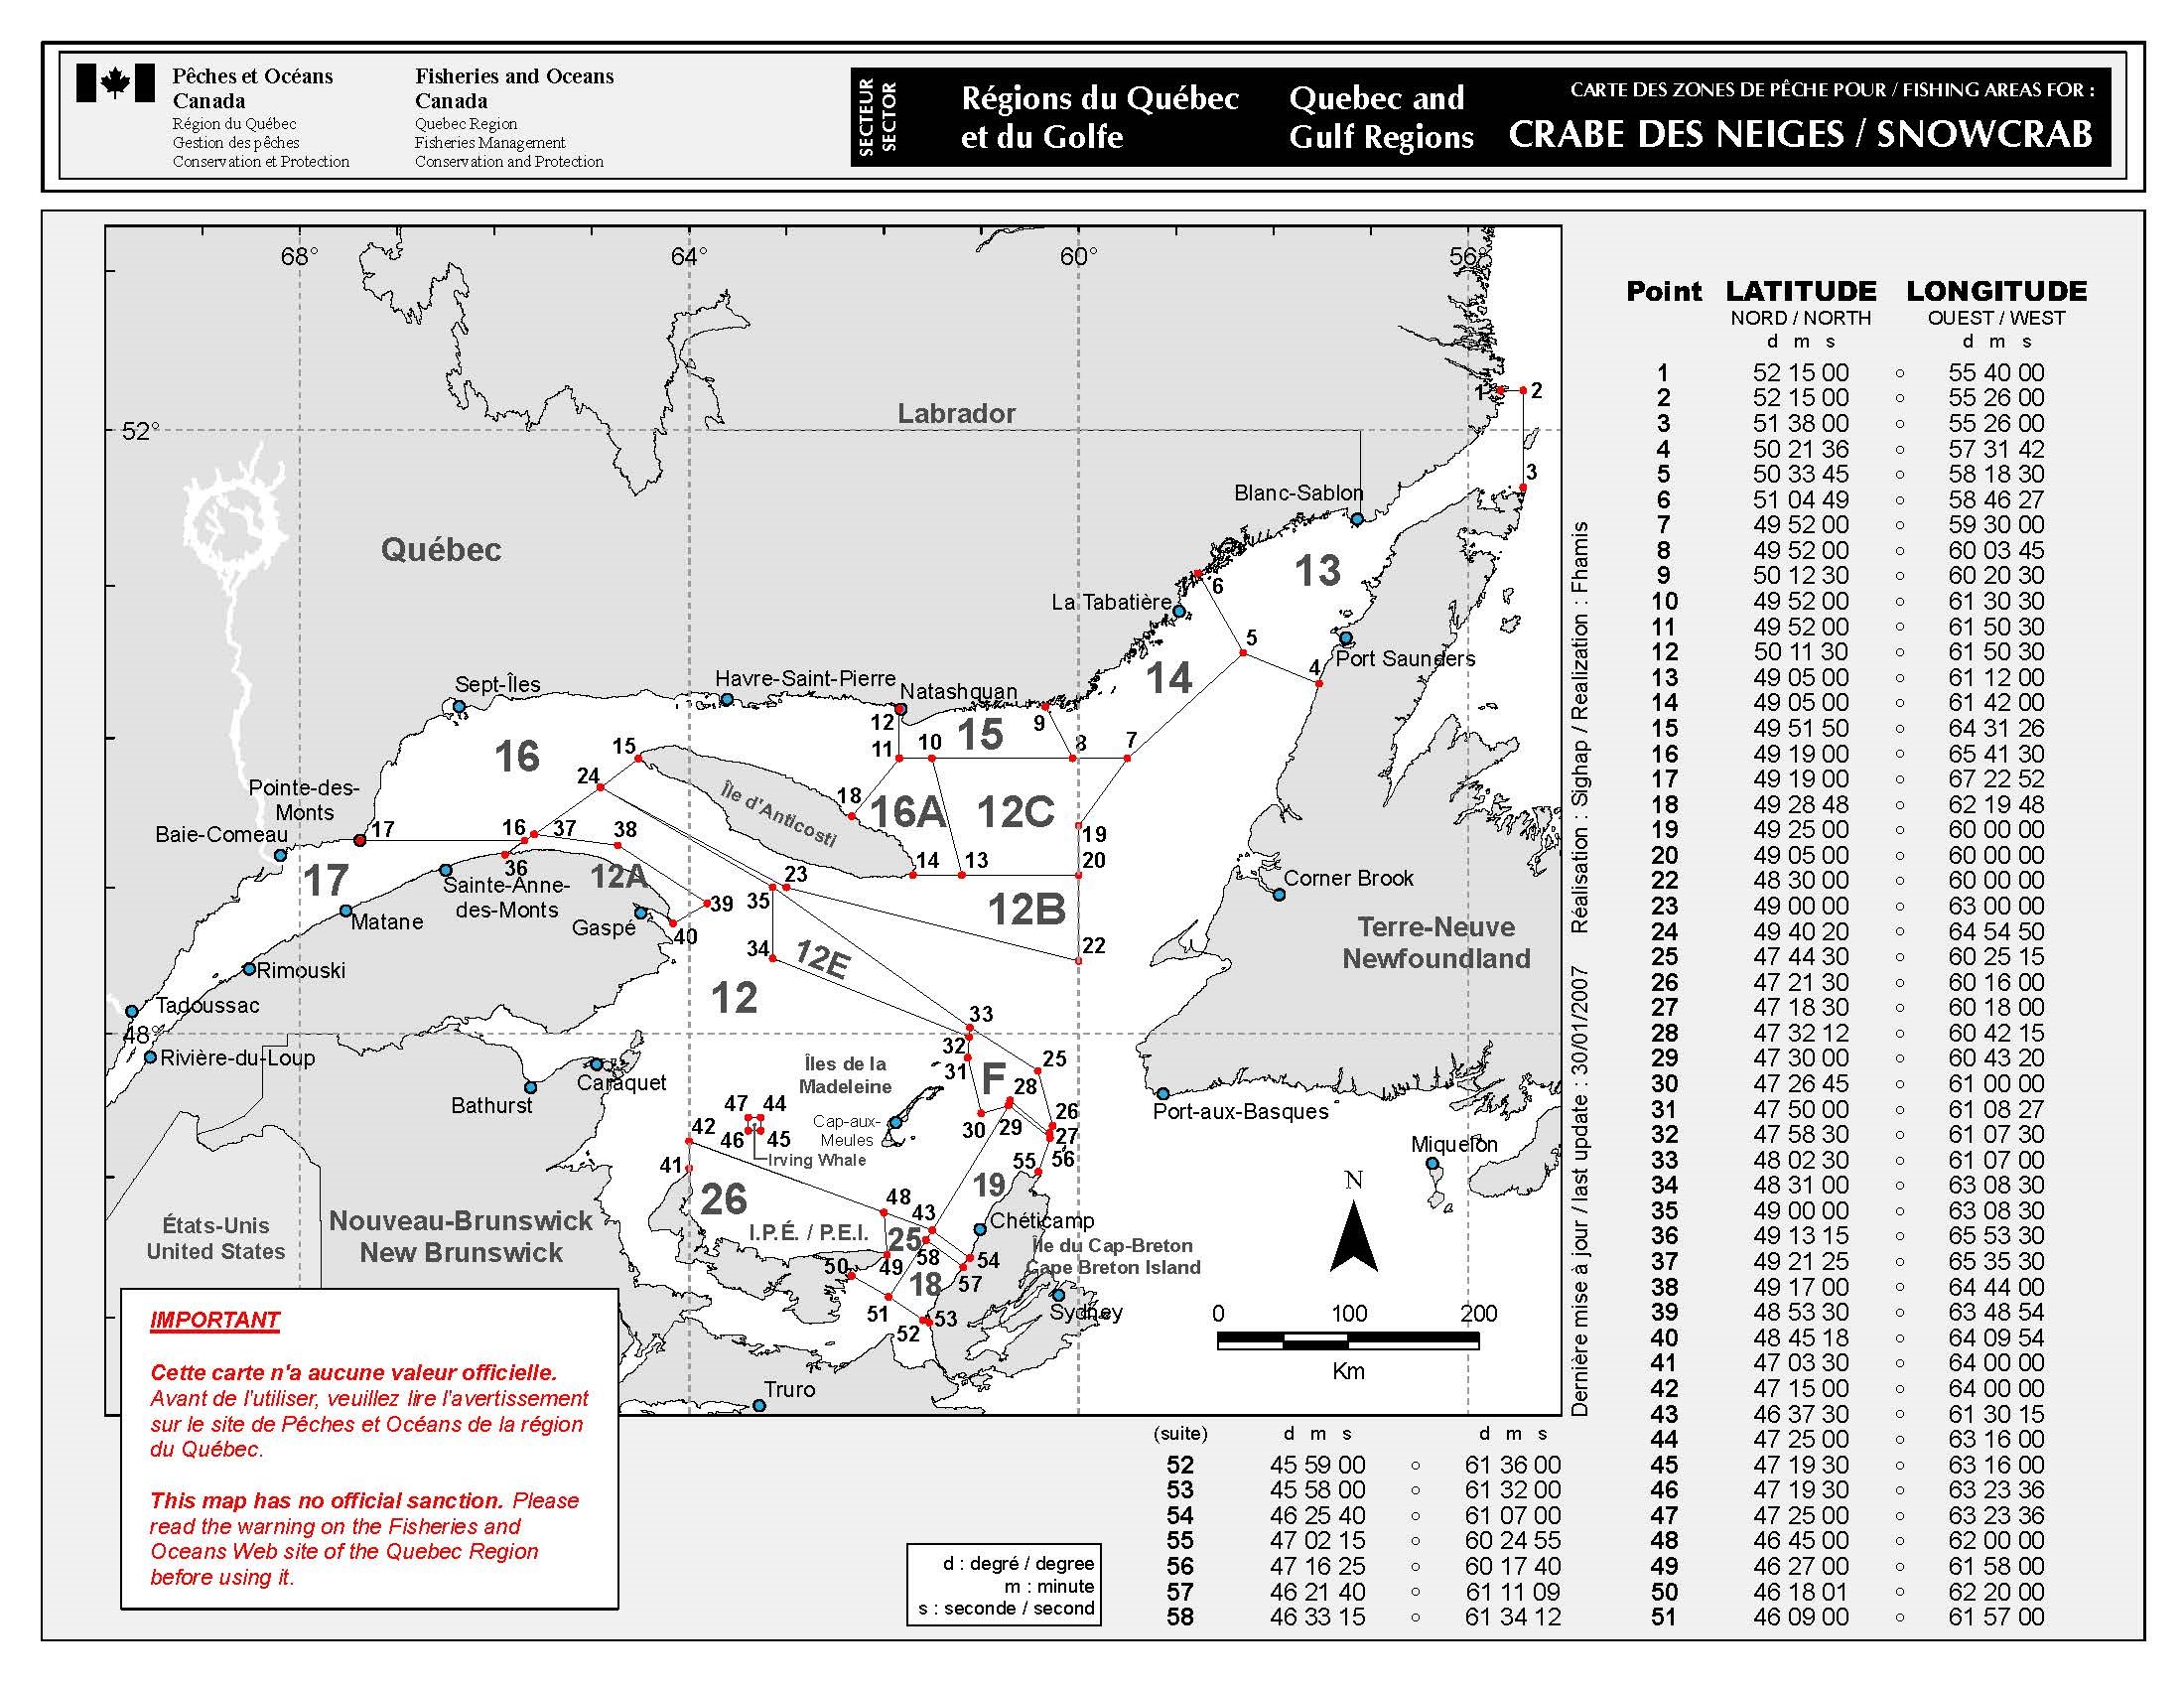 Illustration of snow crab fishing areas in the Estuary and Gulf of St. Lawrence since 2014.